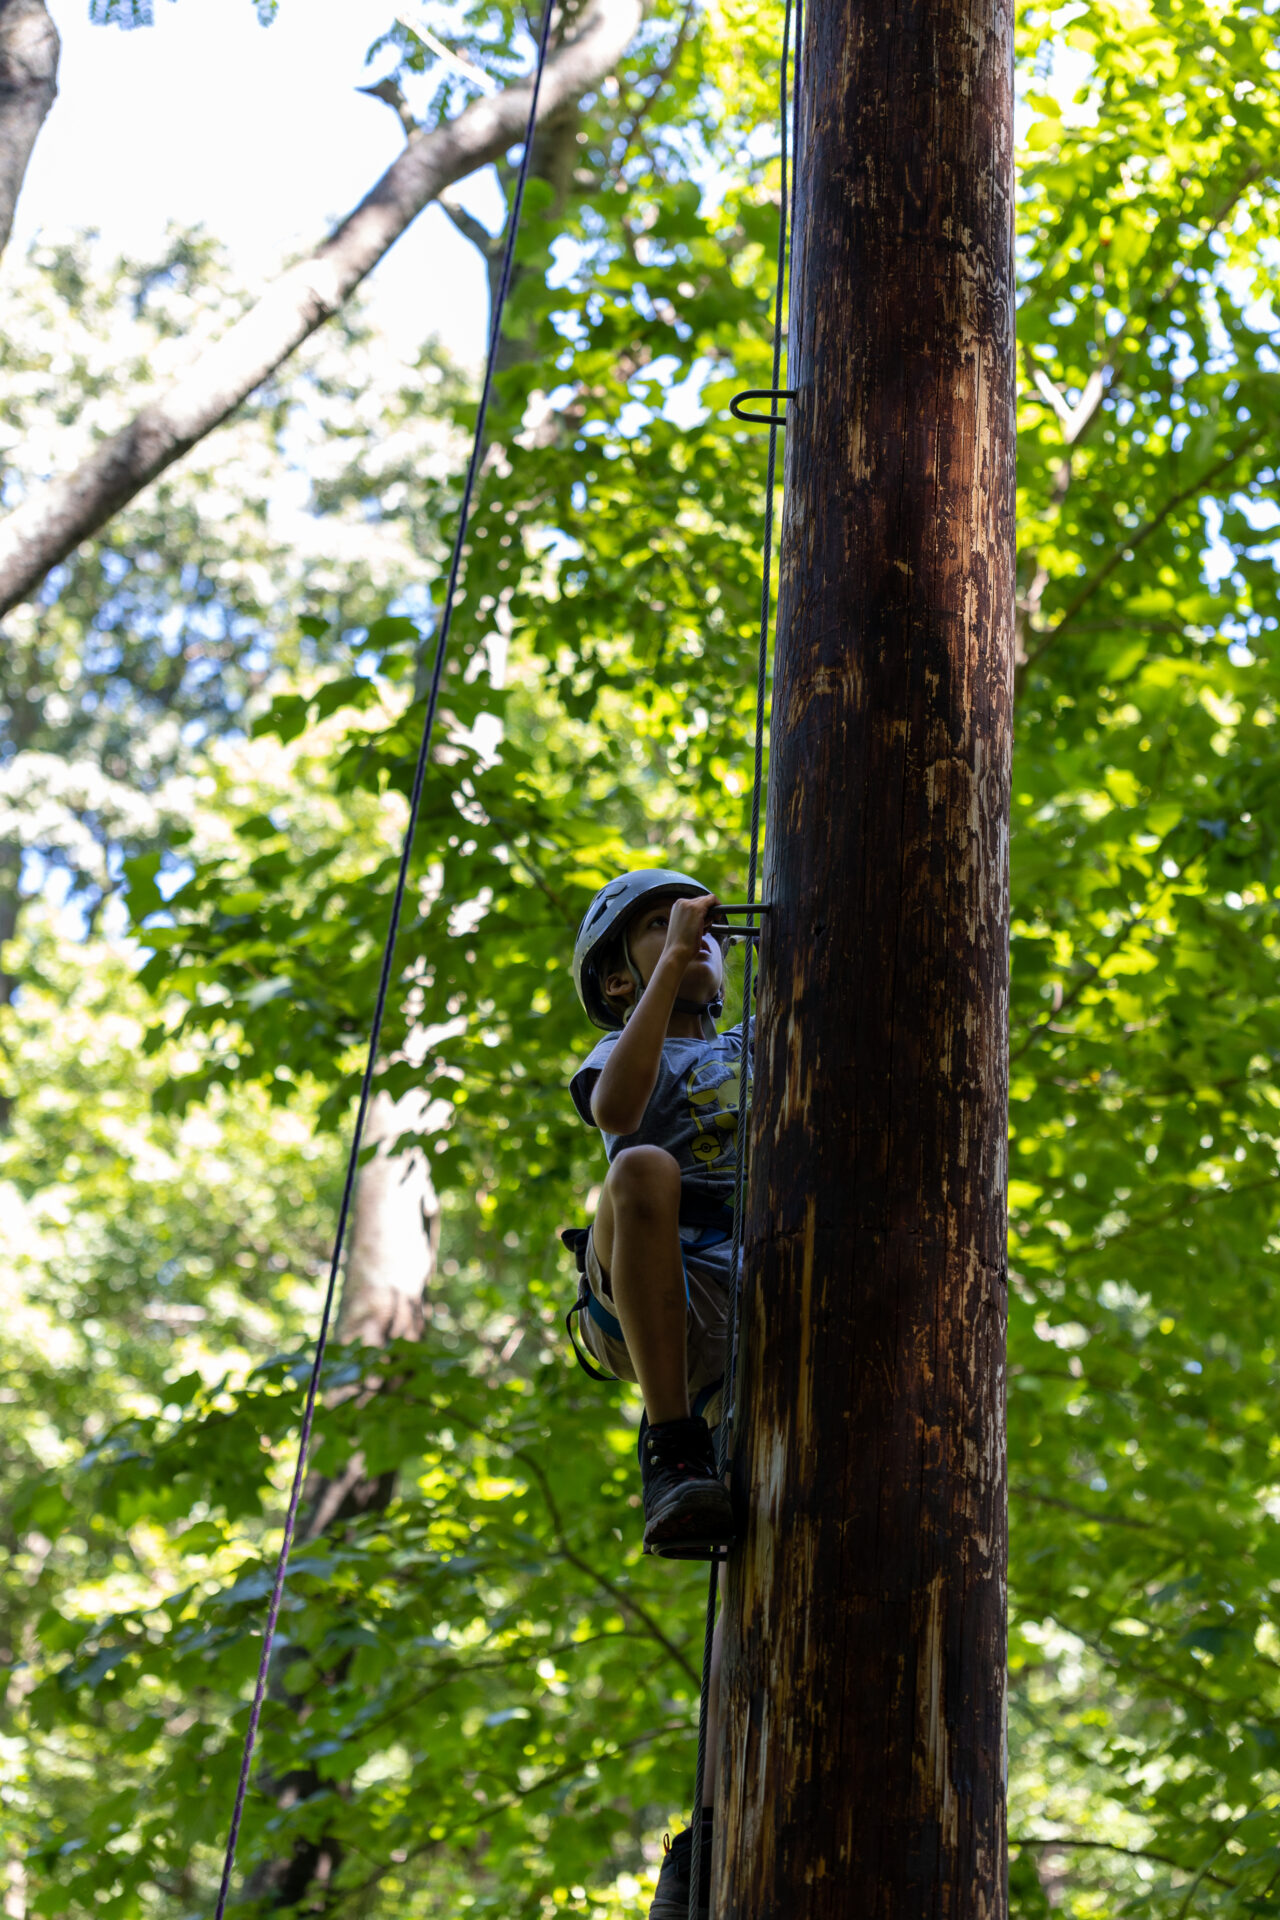 A boy is climbing a tree in the woods, unaware of the BearTrax nearby.